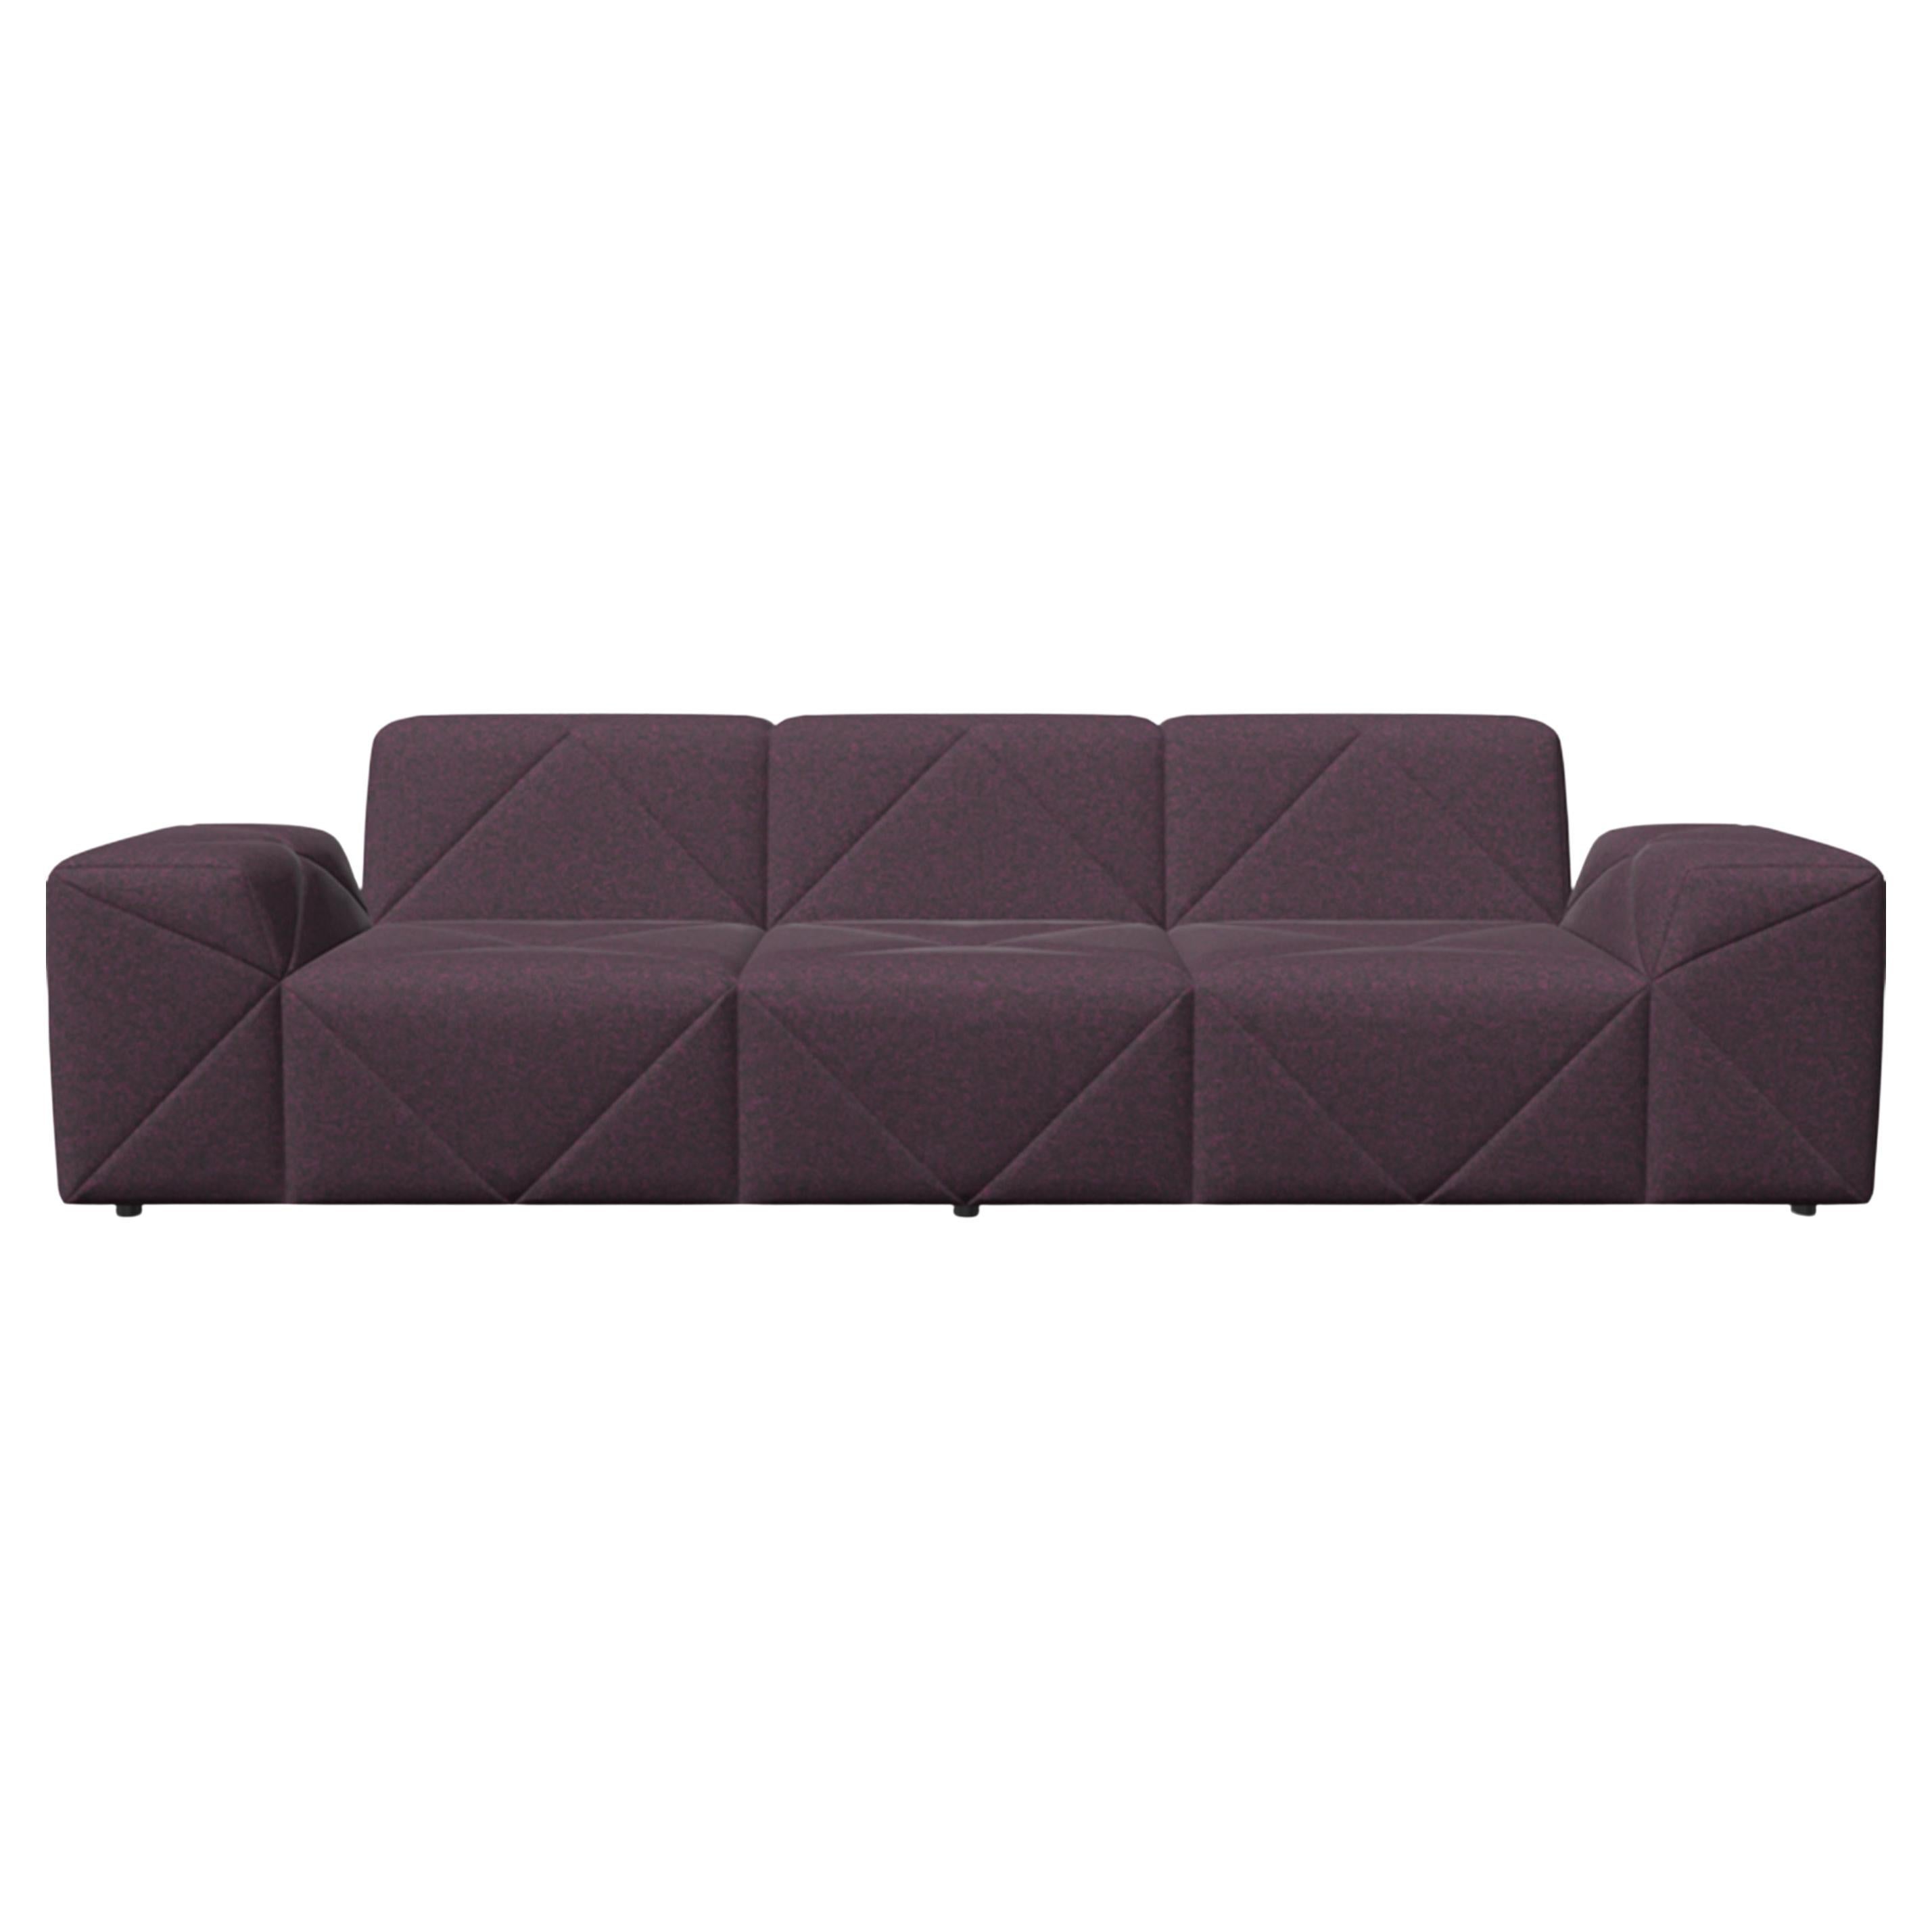 Moooi BFF Triple Seater TE01 Low Sofa in Divina MD, 683 Purple Upholstery For Sale